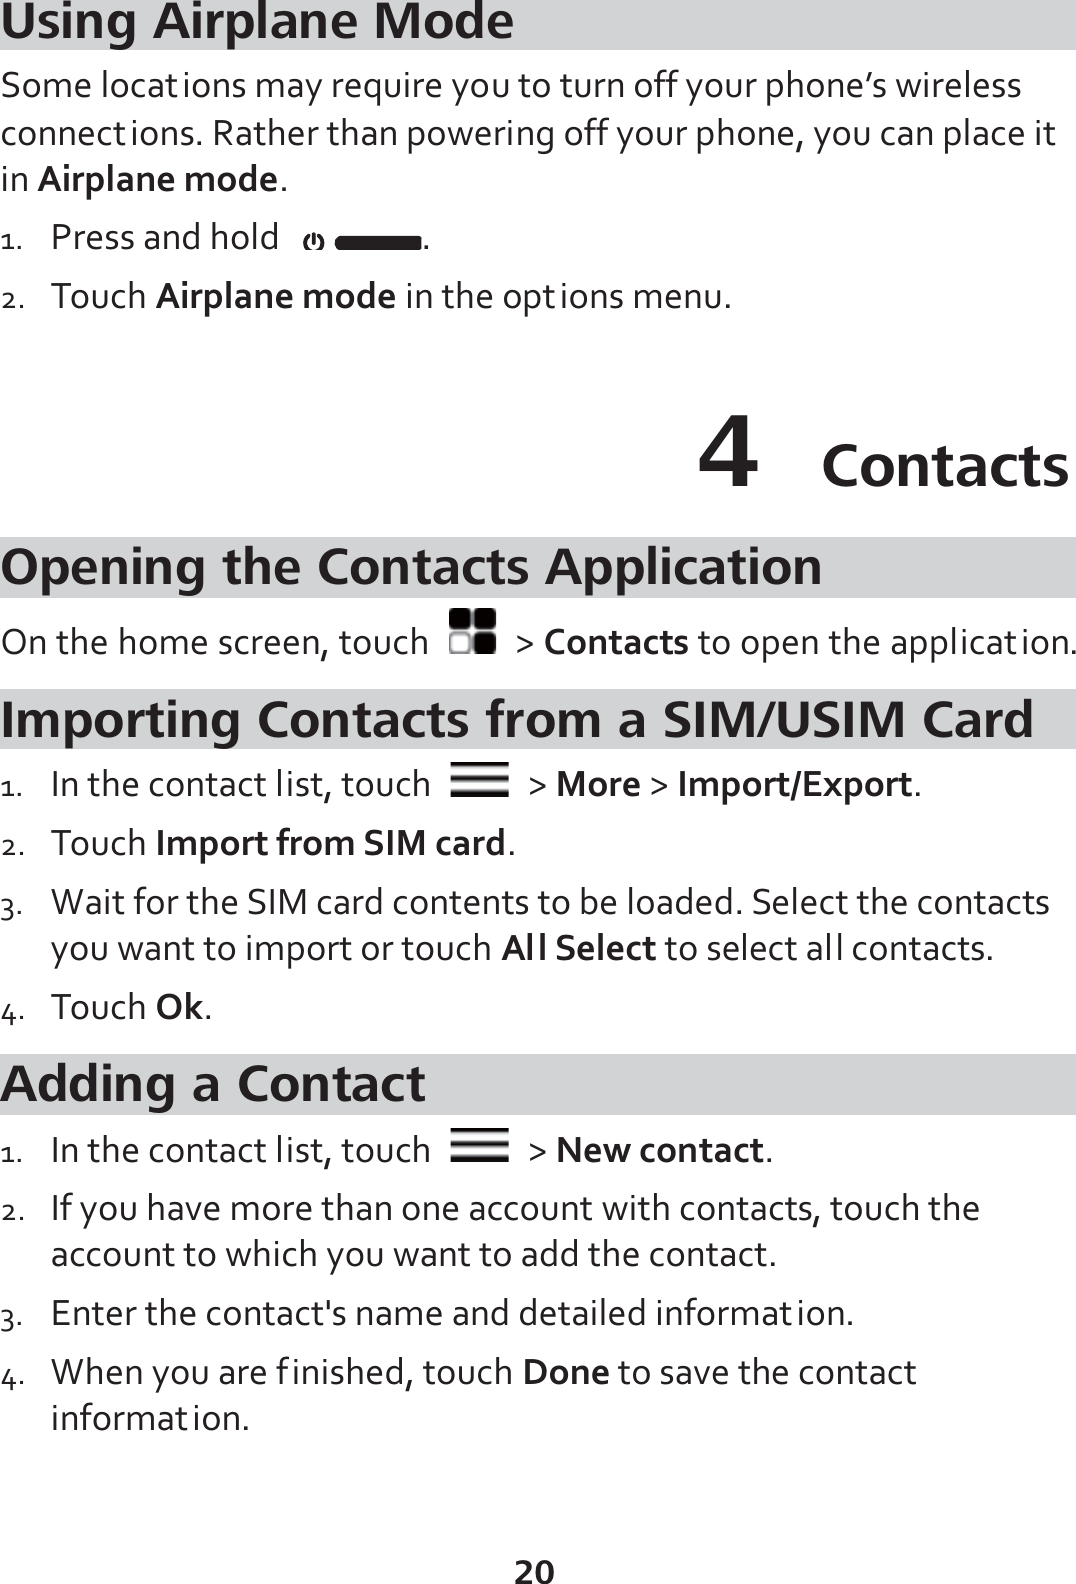 20 Using Airplane Mode Some locations may require you to turn off your phone’s wireless connections. Rather than powering off your phone, you can place it in Airplane mode. 1. Press and hold  . 2. Touch Airplane mode in the options menu. 4  Contacts Opening the Contacts Application On the home screen, touch   &gt; Contacts to open the application. Importing Contacts from a SIM/USIM Card 1. In the contact list, touch   &gt; More &gt; Import/Export. 2. Touch Import from SIM card. 3. Wait for the SIM card contents to be loaded. Select the contacts you want to import or touch All Select to select all contacts. 4. Touch Ok. Adding a Contact 1. In the contact list, touch   &gt; New contact. 2. If you have more than one account with contacts, touch the account to which you want to add the contact. 3. Enter the contact&apos;s name and detailed information. 4. When you are finished, touch Done to save the contact information. 